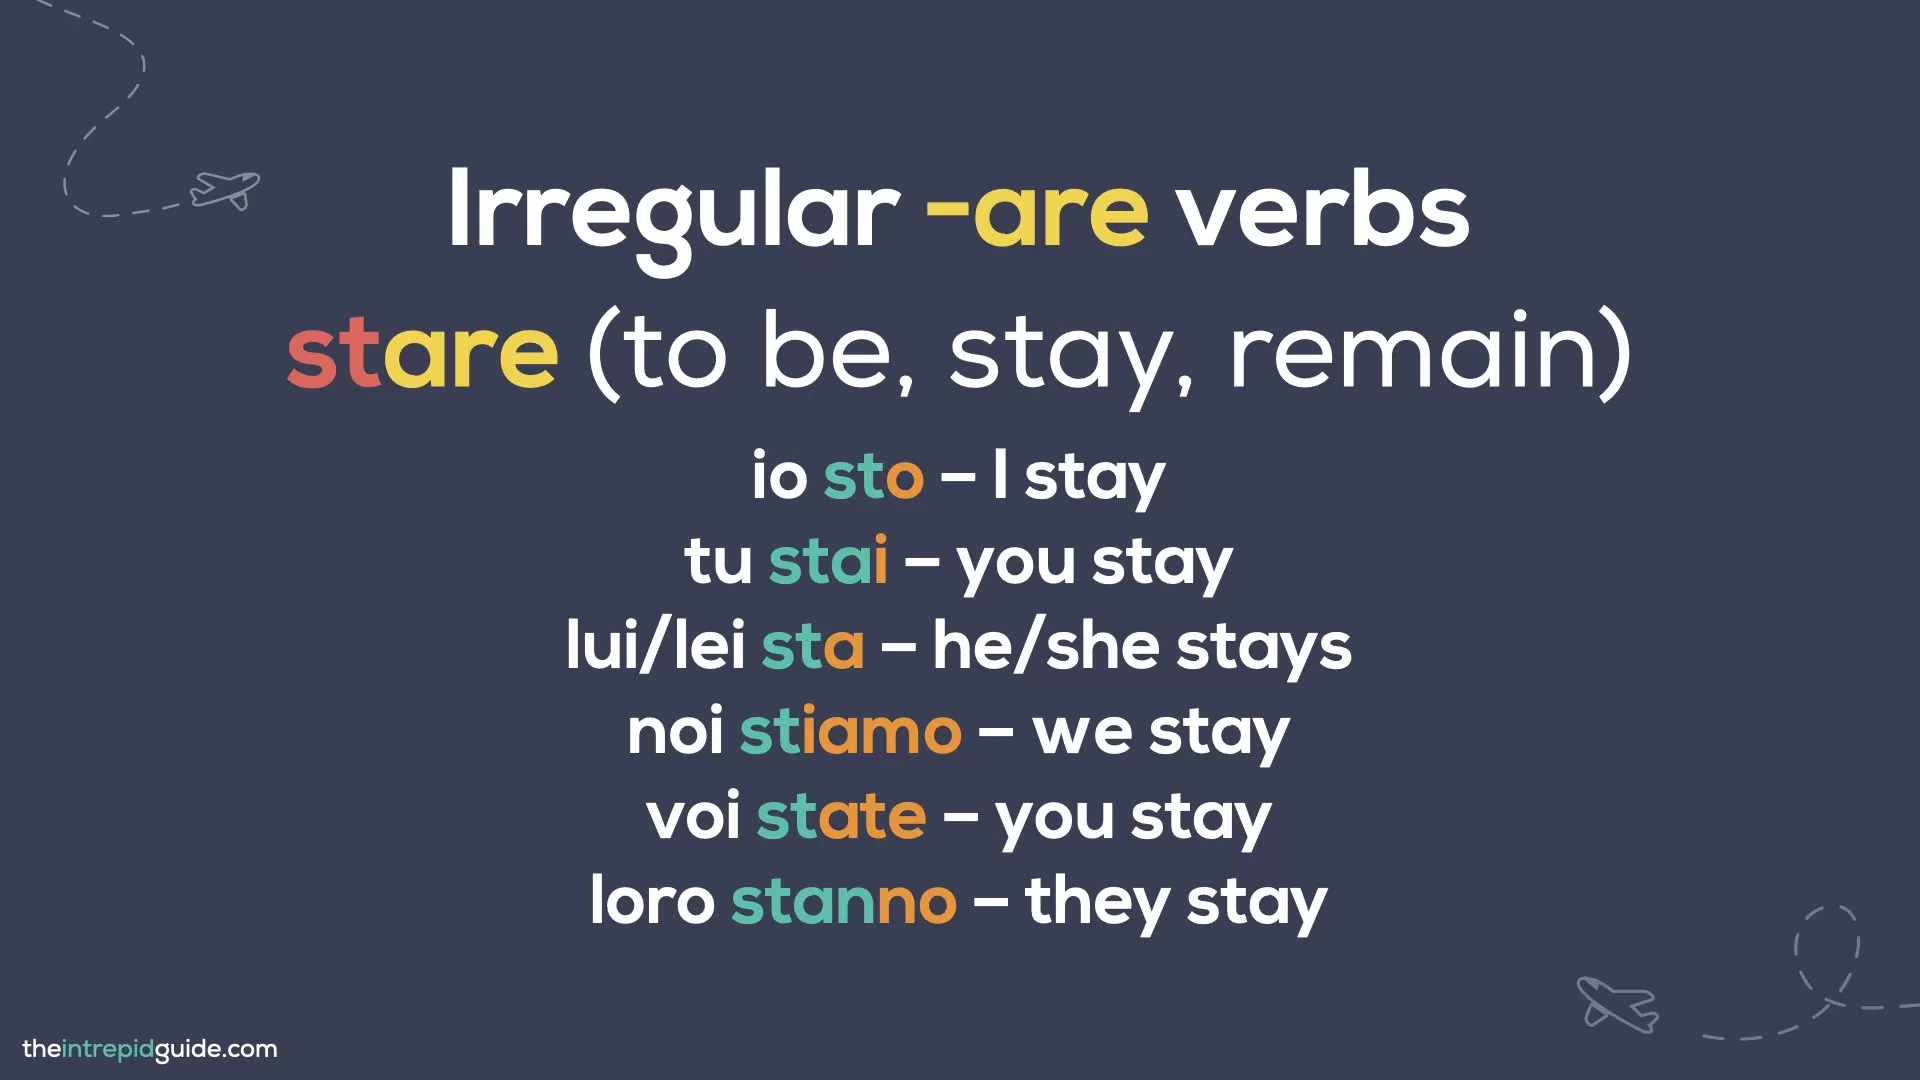 How to Conjugate Italian Verbs - Conjugating the verb stare - to stay, remain